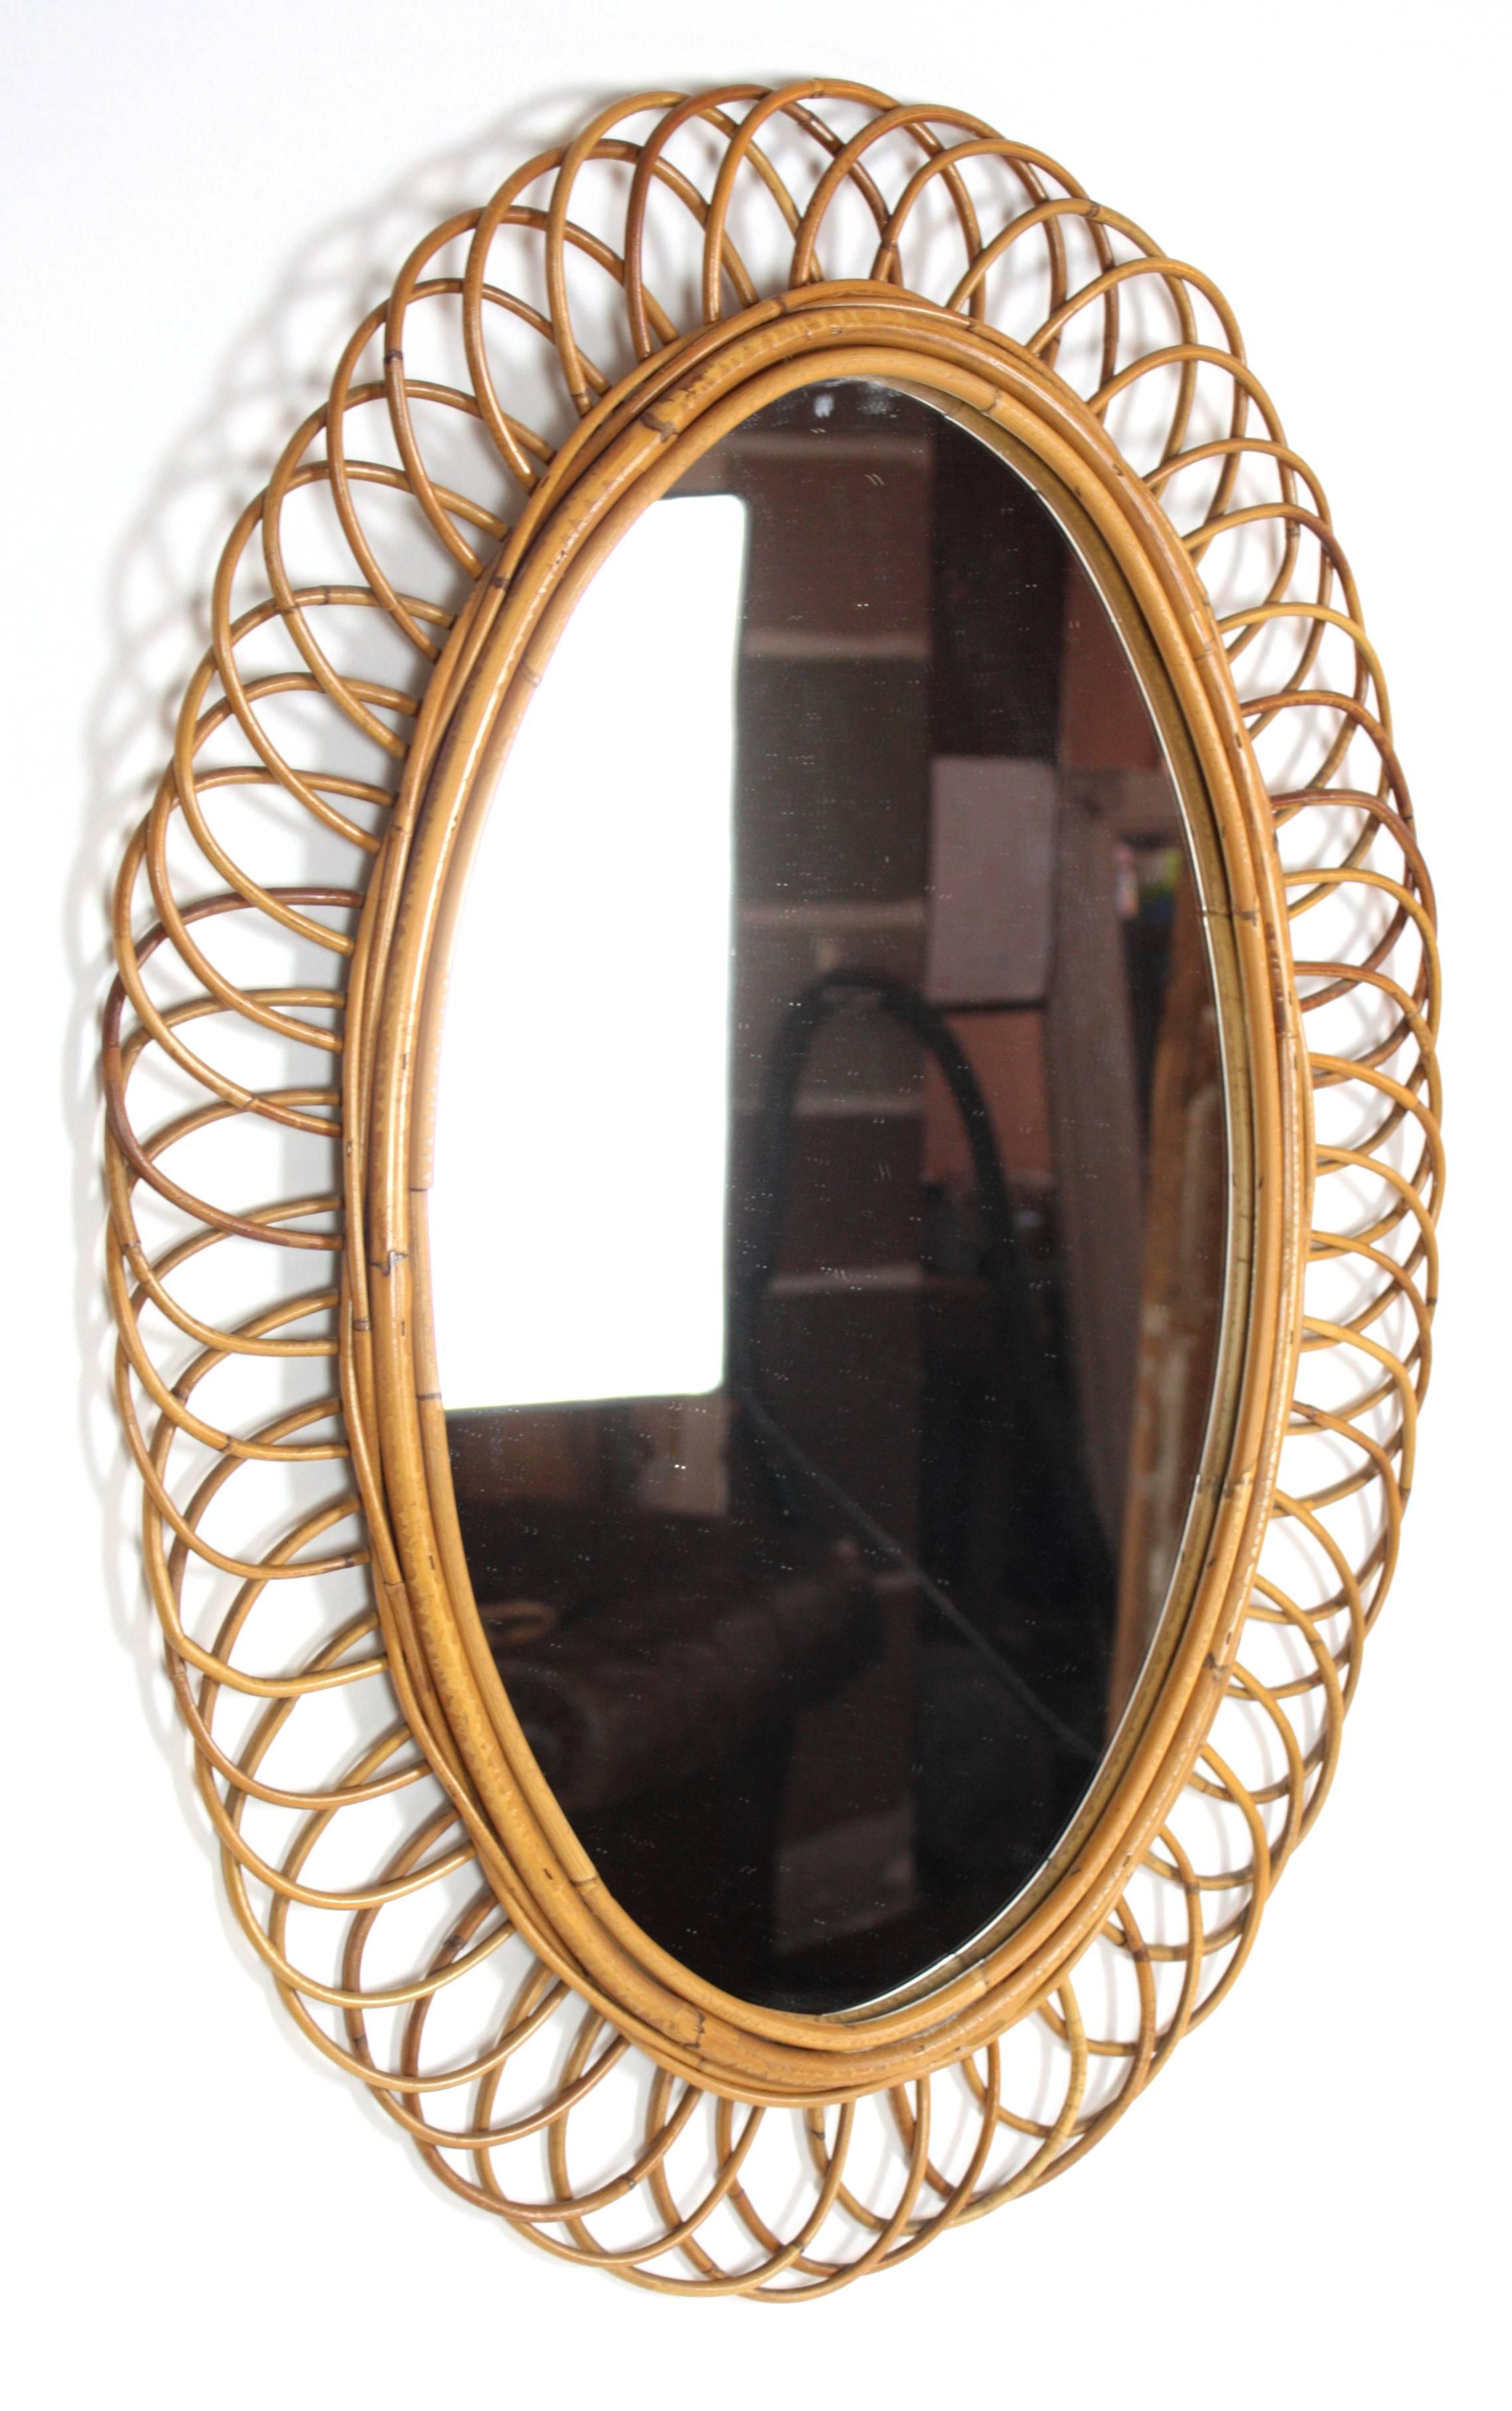 Beautiful bamboo flower burst mirror from the Mediterranean Coast.
Spain, 1960s.

Avaliable other mirrors in this manner:
Please, kindly check our storefront.